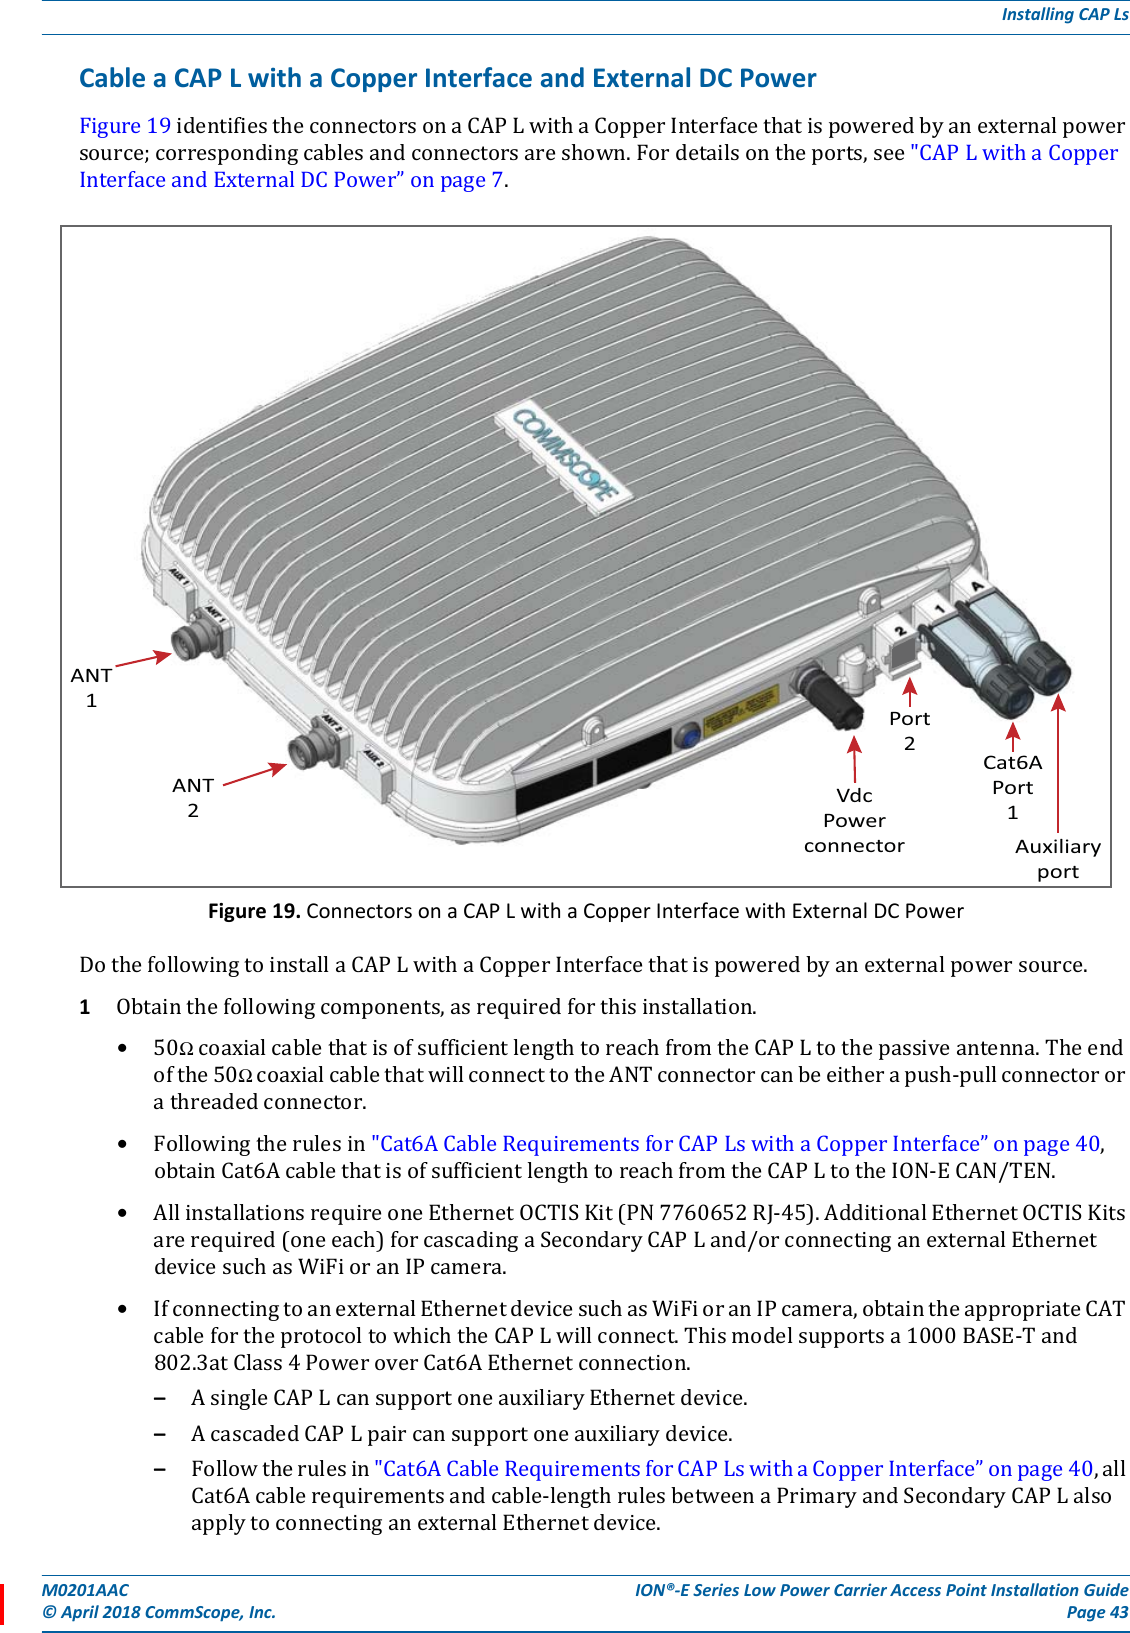 M0201AAC ION®-E Series Low Power Carrier Access Point Installation Guide© April 2018 CommScope, Inc. Page 43Installing CAP LsCable a CAP L with a Copper Interface and External DC PowerFigure19identifiestheconnectorsonaCAPLwithaCopperInterfacethatispoweredbyanexternalpowersource;correspondingcablesandconnectorsareshown.Fordetailsontheports,see&quot;CAPLwithaCopperInterfaceandExternalDCPower”onpage7.Figure 19. Connectors on a CAP L with a Copper Interface with External DC PowerDothefollowingtoinstallaCAPLwithaCopperInterfacethatispoweredbyanexternalpowersource.1Obtainthefollowingcomponents,asrequiredforthisinstallation.•50ΩcoaxialcablethatisofsufficientlengthtoreachfromtheCAPLtothepassiveantenna.Theendofthe50ΩcoaxialcablethatwillconnecttotheANTconnectorcanbeeitherapush-pullconnectororathreadedconnector.•Followingtherulesin&quot;Cat6ACableRequirementsforCAPLswithaCopperInterface”onpage40,obtainCat6AcablethatisofsufficientlengthtoreachfromtheCAPLtotheION-ECAN/TEN.•AllinstallationsrequireoneEthernetOCTISKit(PN7760652RJ-45).AdditionalEthernetOCTISKitsarerequired(oneeach)forcascadingaSecondaryCAPLand/orconnectinganexternalEthernetdevicesuchasWiFioranIPcamera.•IfconnectingtoanexternalEthernetdevicesuchasWiFioranIPcamera,obtaintheappropriateCATcablefortheprotocoltowhichtheCAPLwillconnect.Thismodelsupportsa1000BASE-Tand802.3atClass4PoweroverCat6AEthernetconnection.–AsingleCAPLcansupportoneauxiliaryEthernetdevice.–AcascadedCAPLpaircansupportoneauxiliarydevice.–Followtherulesin&quot;Cat6ACableRequirementsforCAPLswithaCopperInterface”onpage40,allCat6Acablerequirementsandcable-lengthrulesbetweenaPrimaryandSecondaryCAPLalsoapplytoconnectinganexternalEthernetdevice.ANT1ANT2VdcPowerconnectorCat6APort1AuxiliaryportPort2